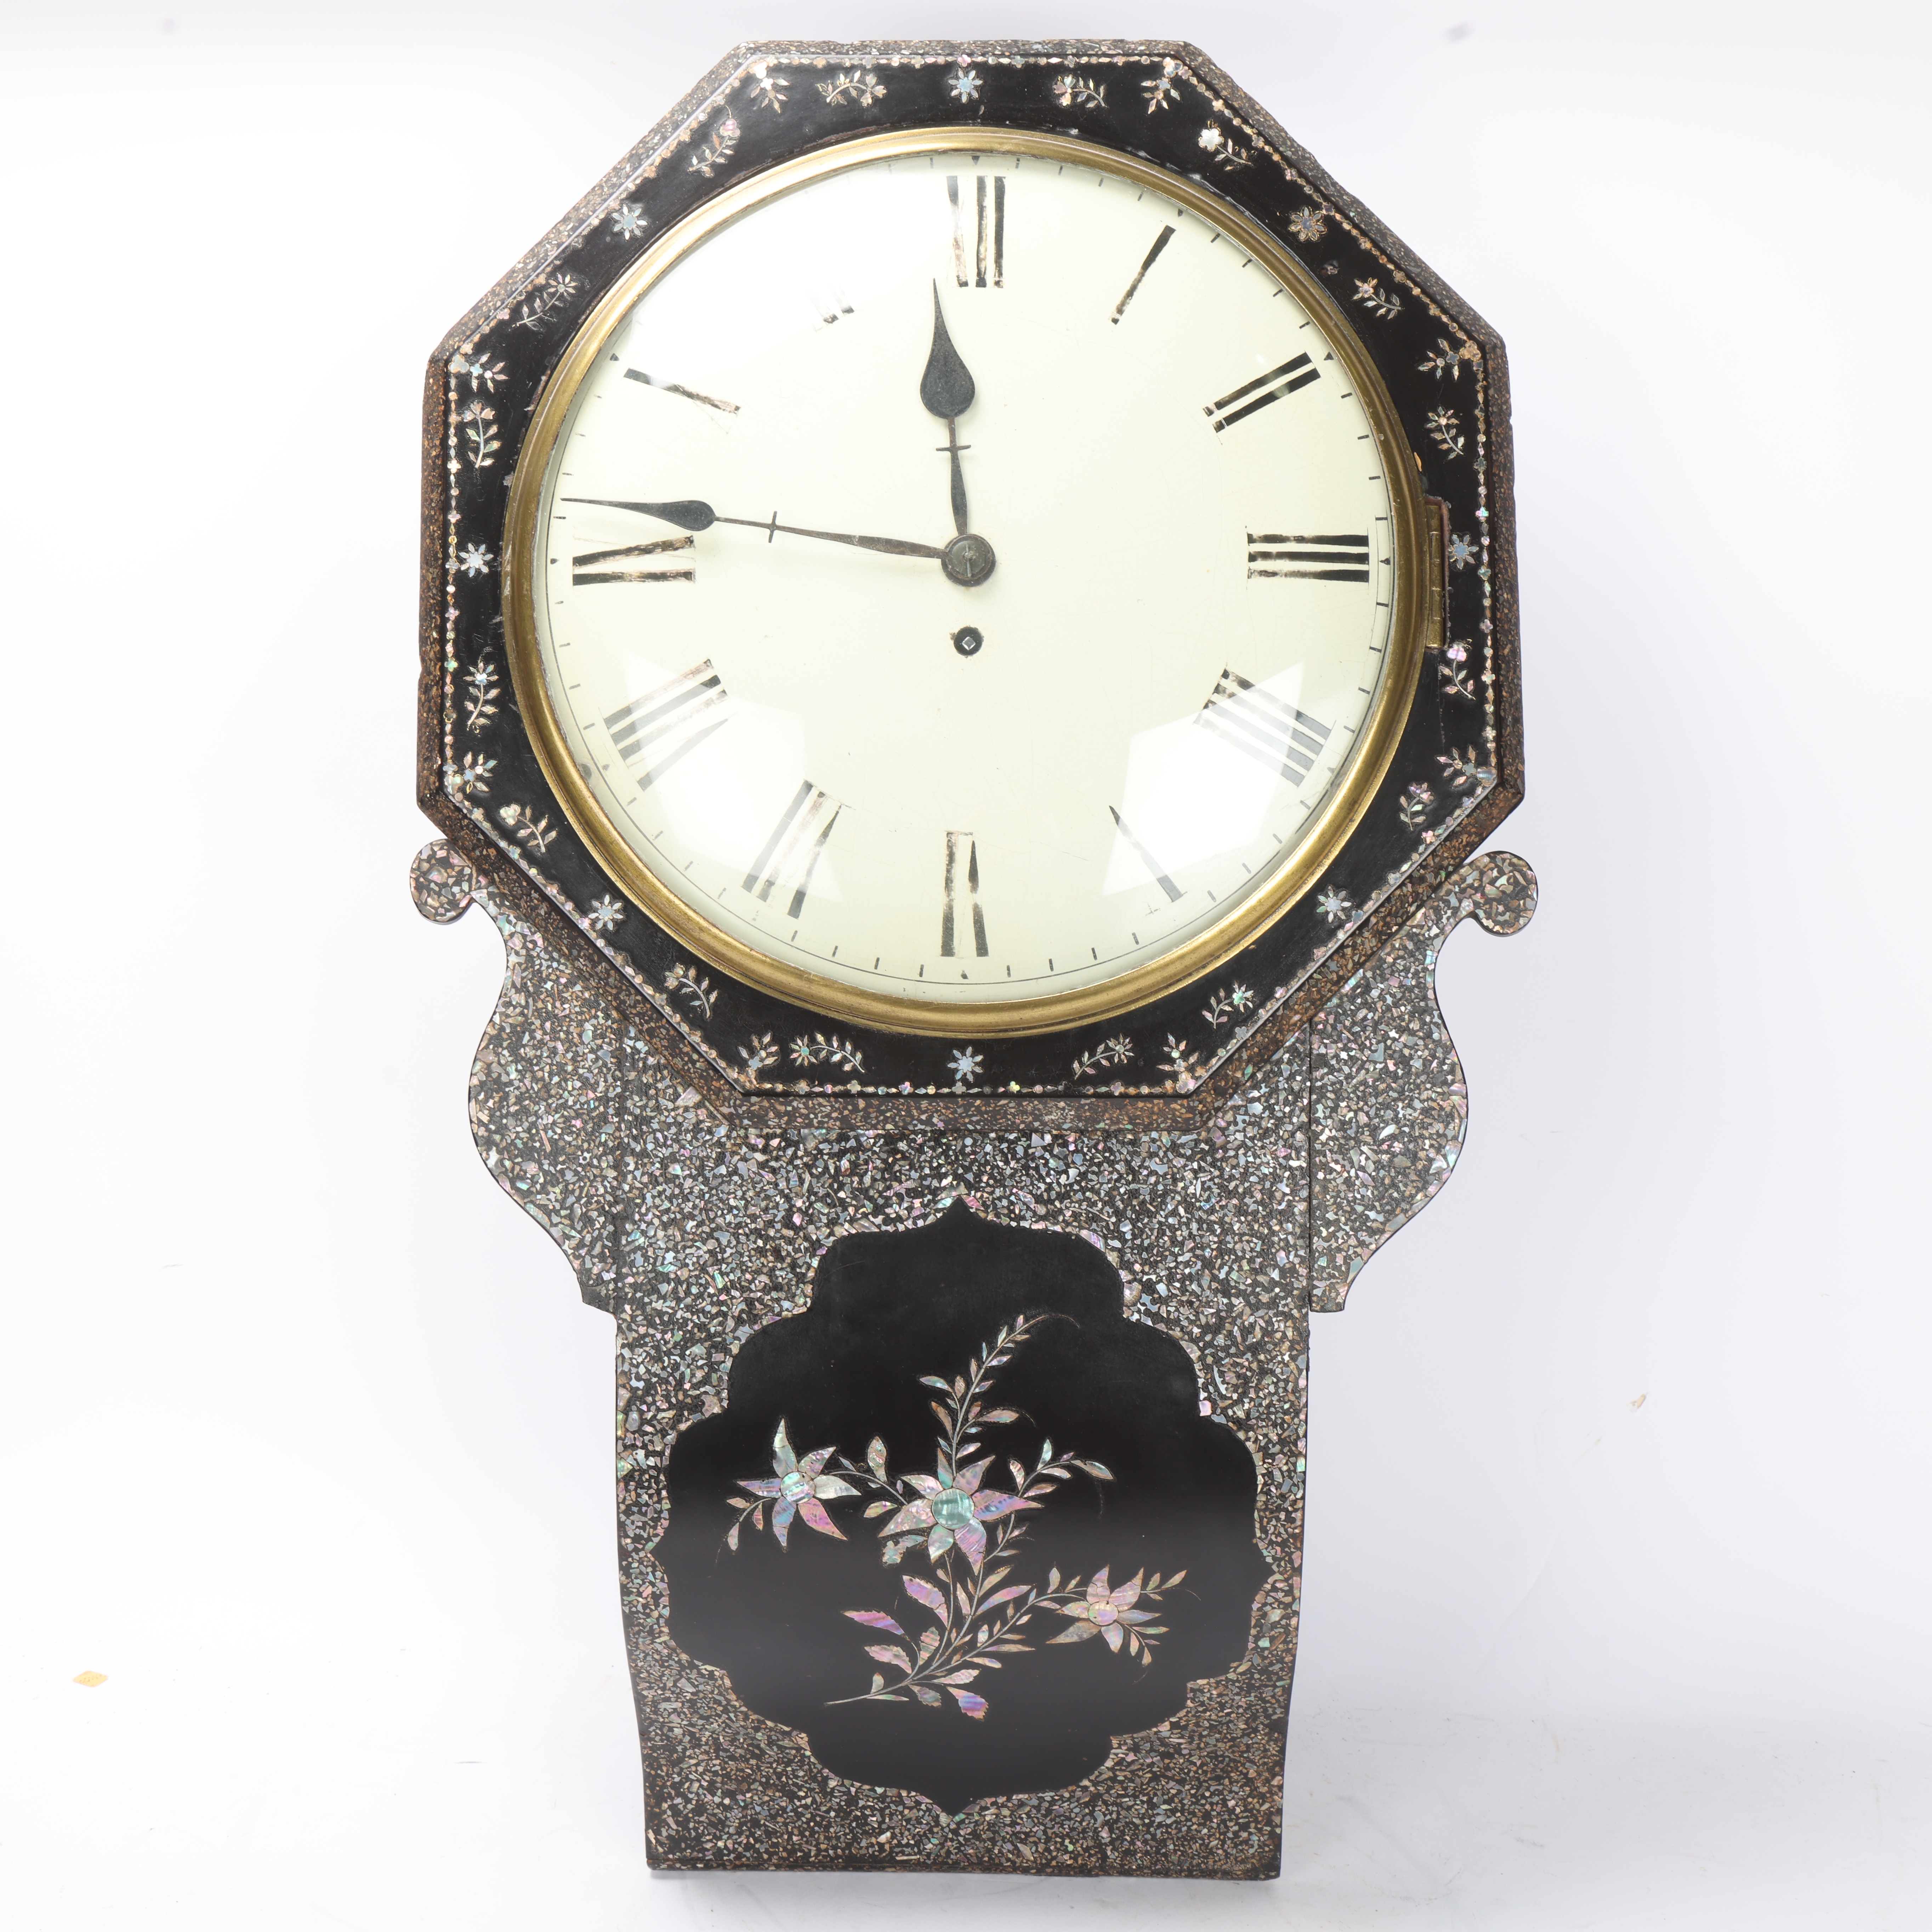 A papier-mache cased wall clock with abalone insert decoration and a fusee movement, height 65cm